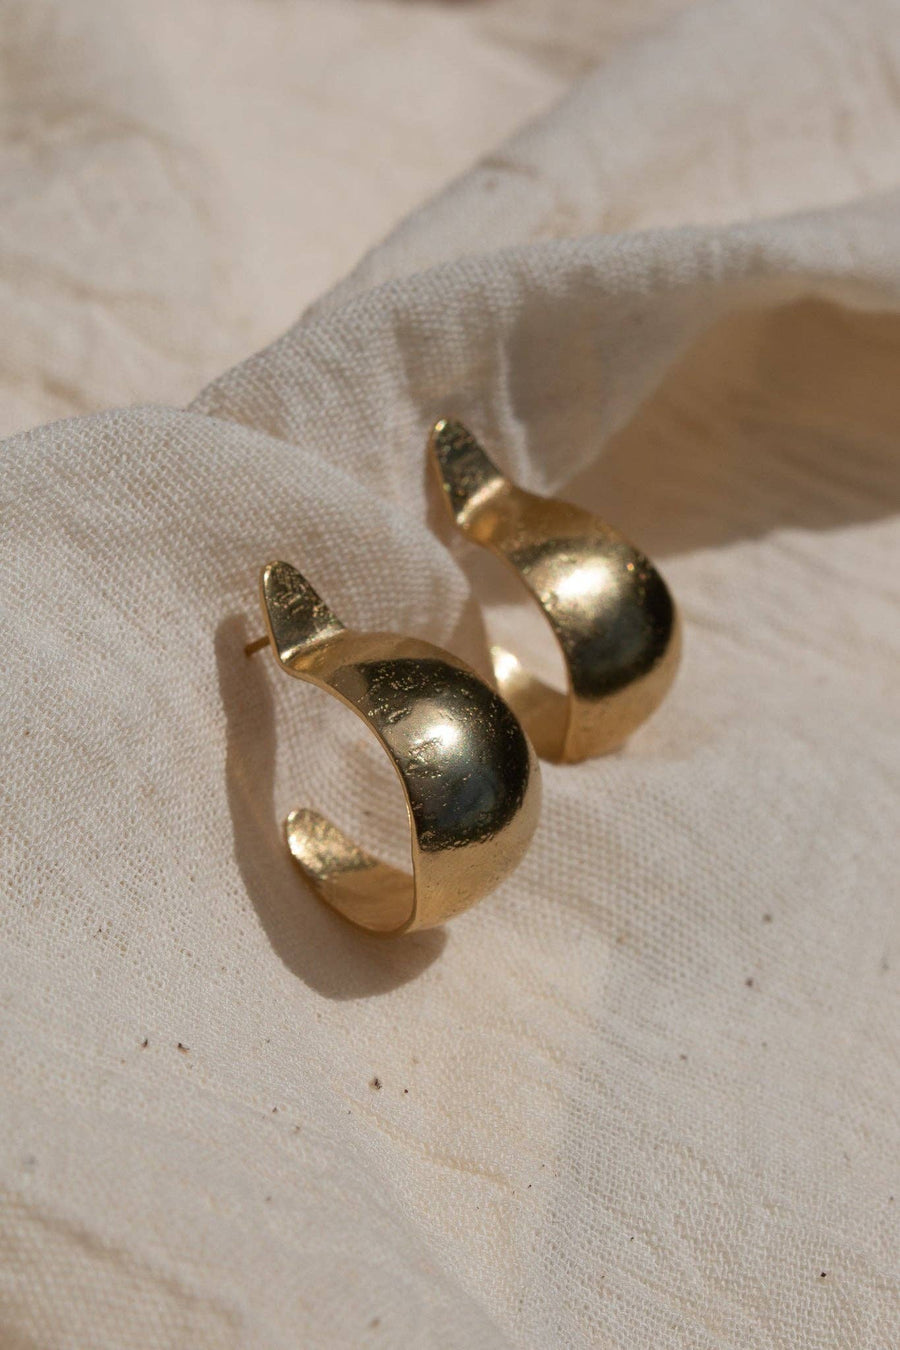 The ‘Sina’ Earrings (meaning ‘To Pinch’ in Tumbuka) are the epitome of organic elegance. Hand-forged from brass and sterling silver posts coated in a luxuriously thick layer of 14k recycled gold, these sophisticated yet natural earrings have all the style of a luxury piece while remaining lightweight, comfortable, and low key enough for everyday wear.